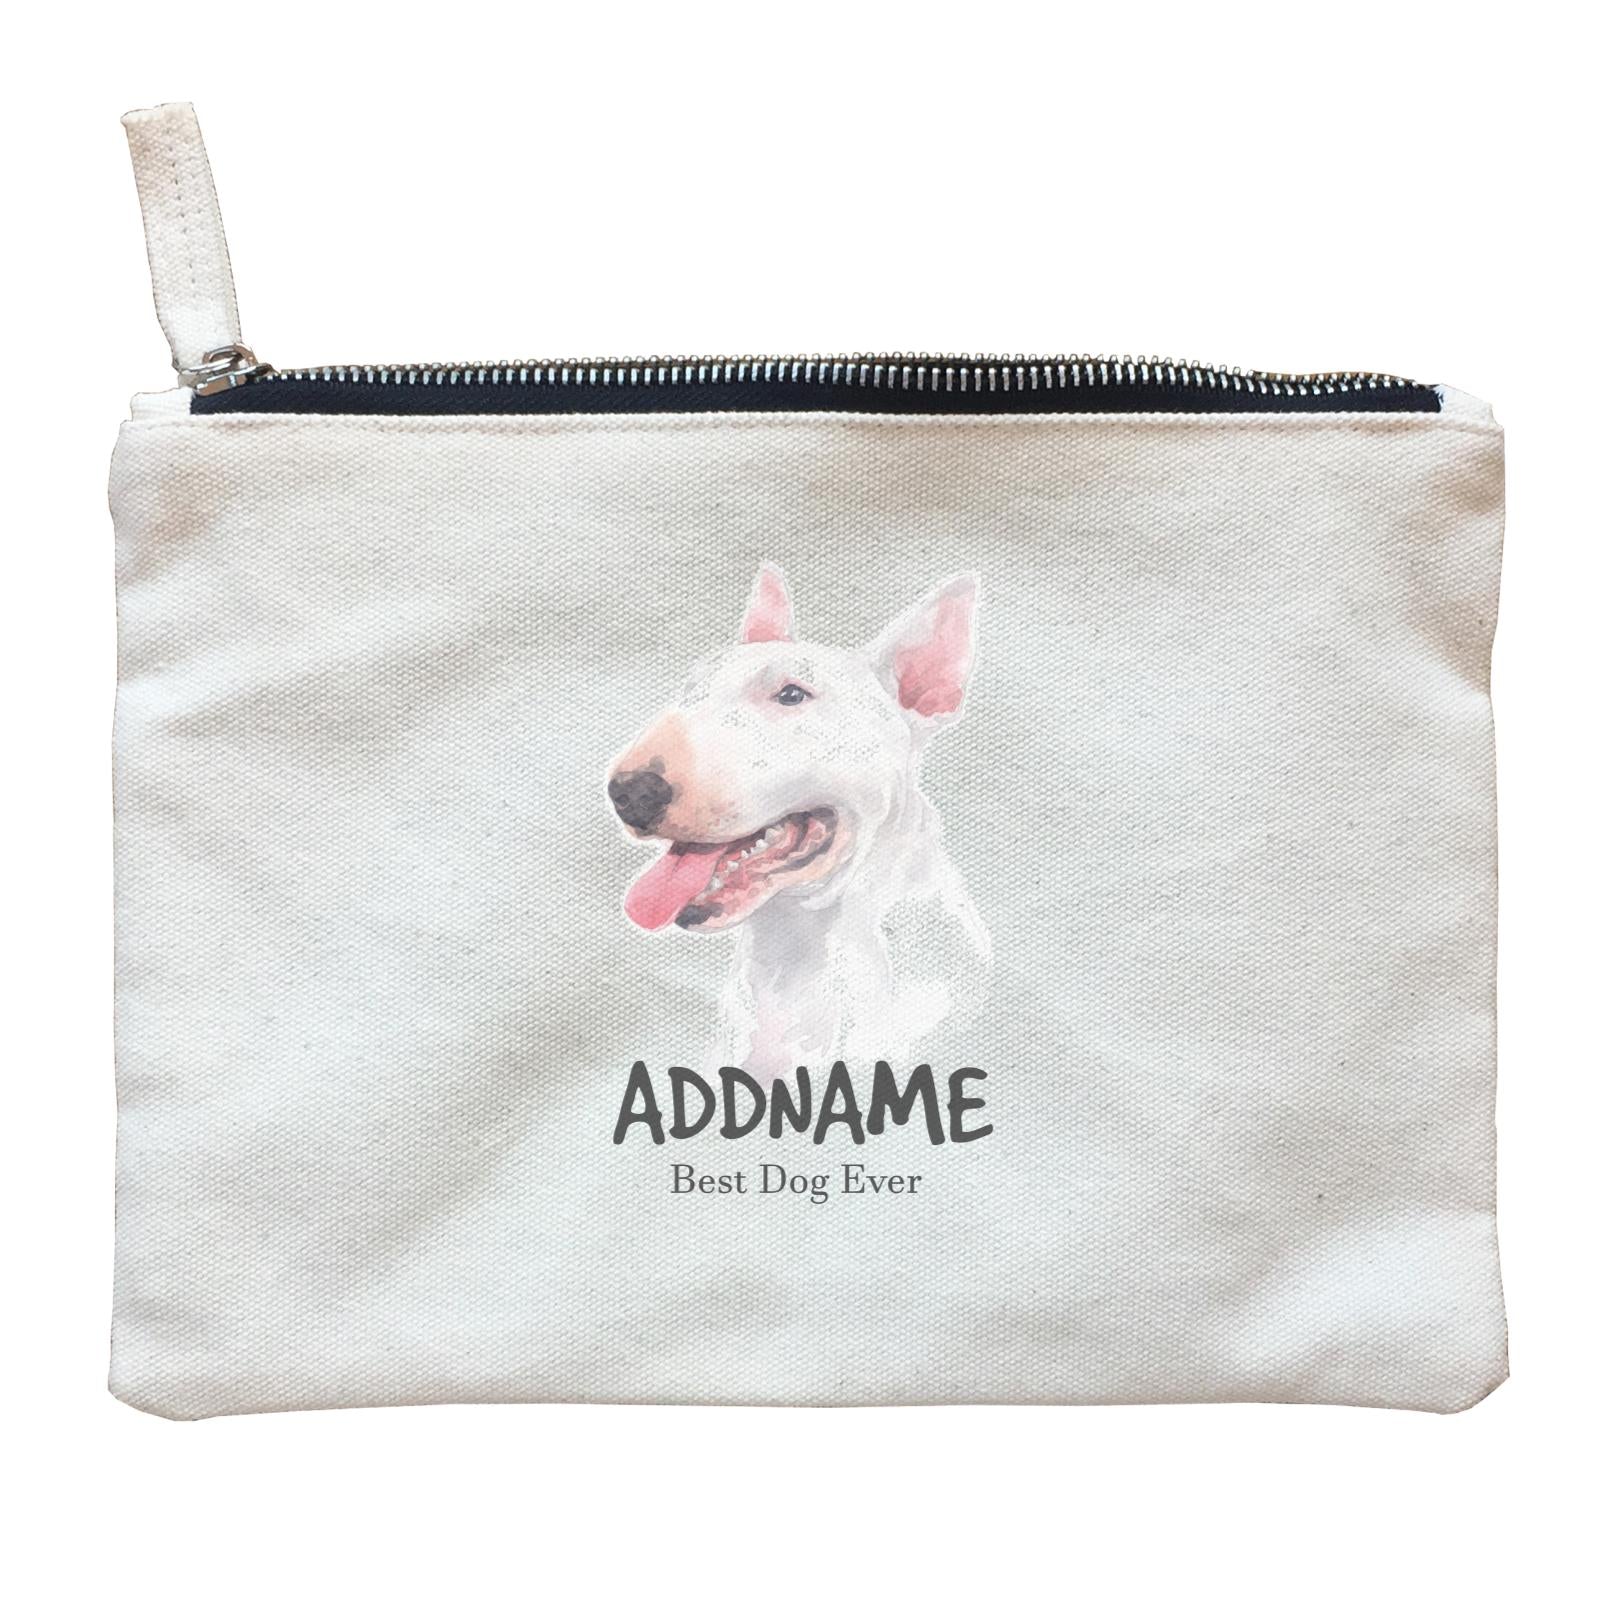 Watercolor Dog Bull Terrier Best Dog Ever Addname Zipper Pouch